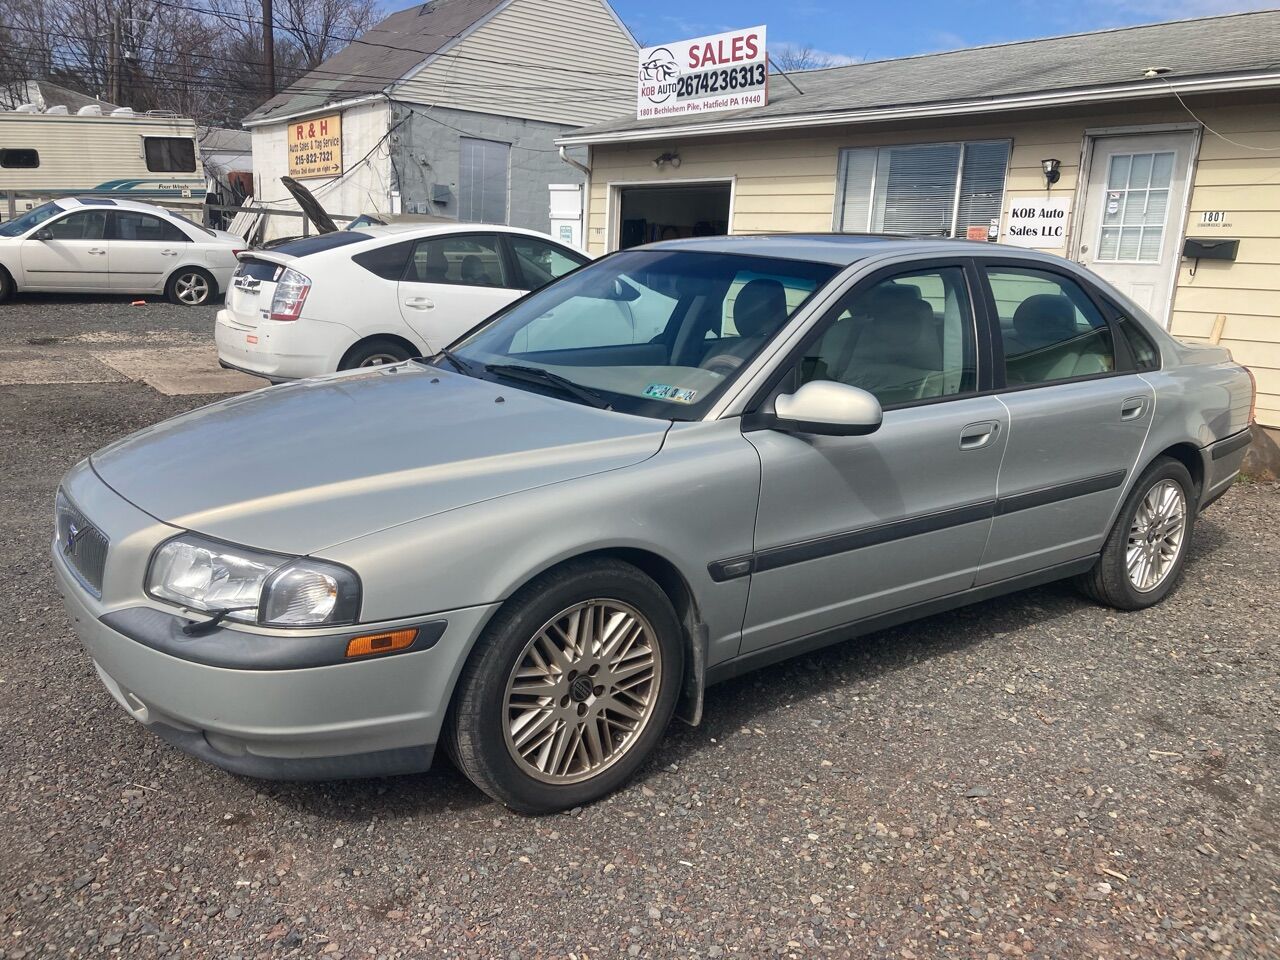 2001 Volvo S80 For Sale - Carsforsale.com®